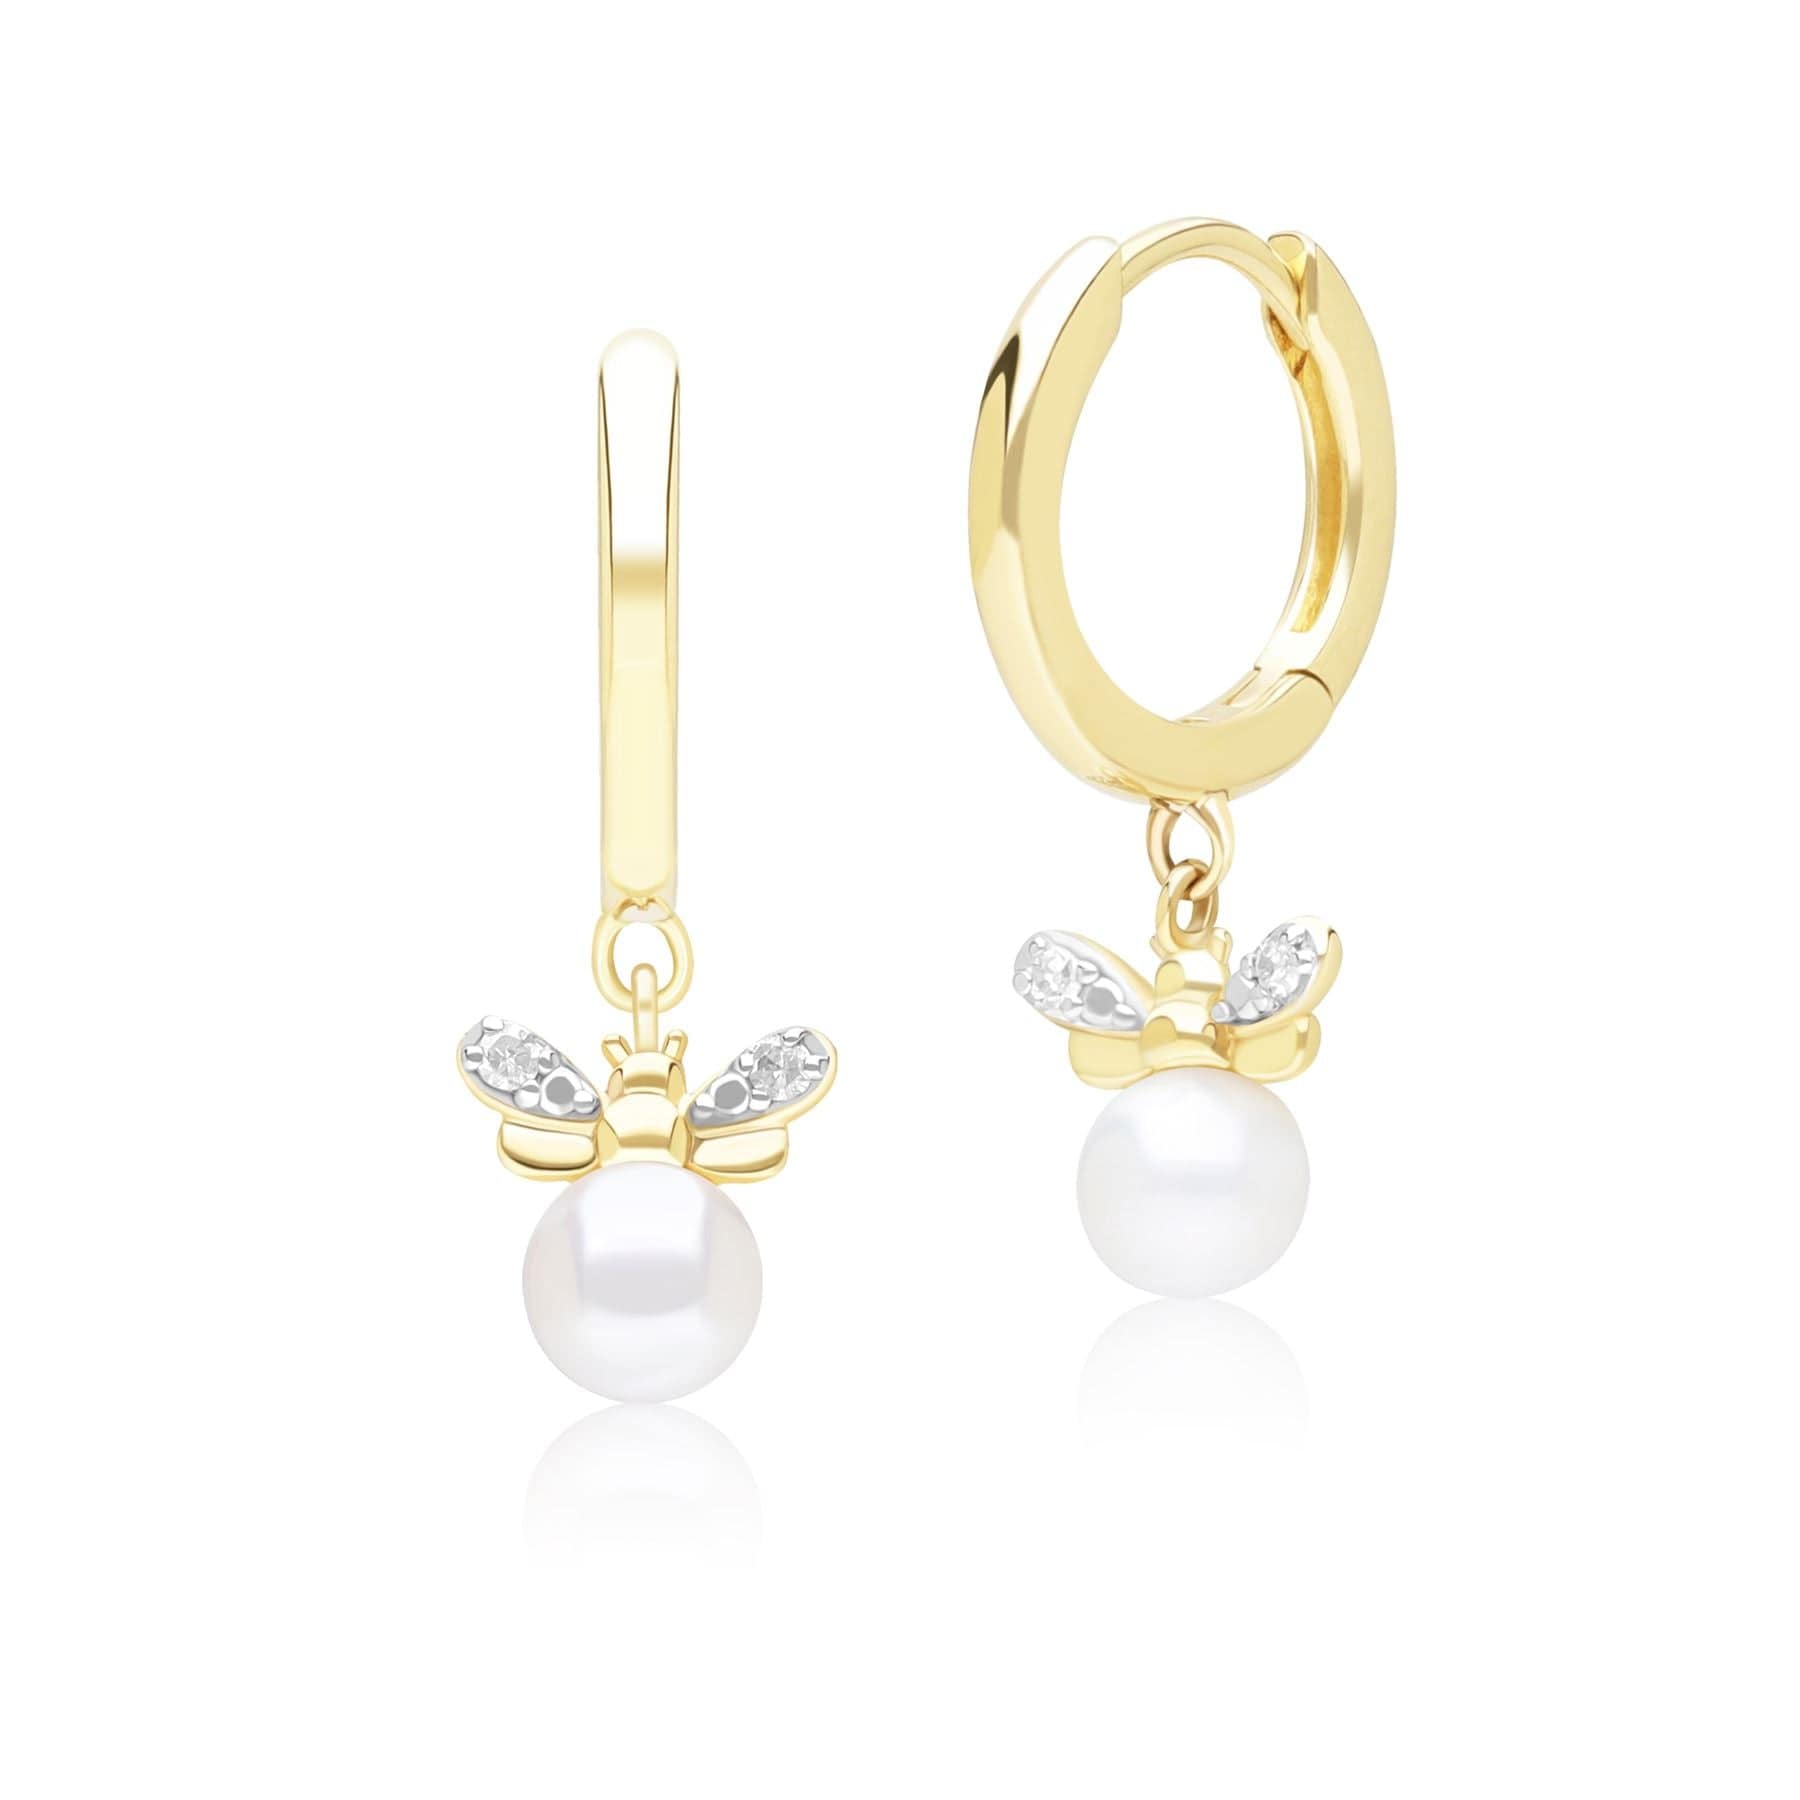 Honeycomb Inspired Pearl and Diamond Bee Hoop Earrings in 9ct Yellow GoldFront  135E1873019